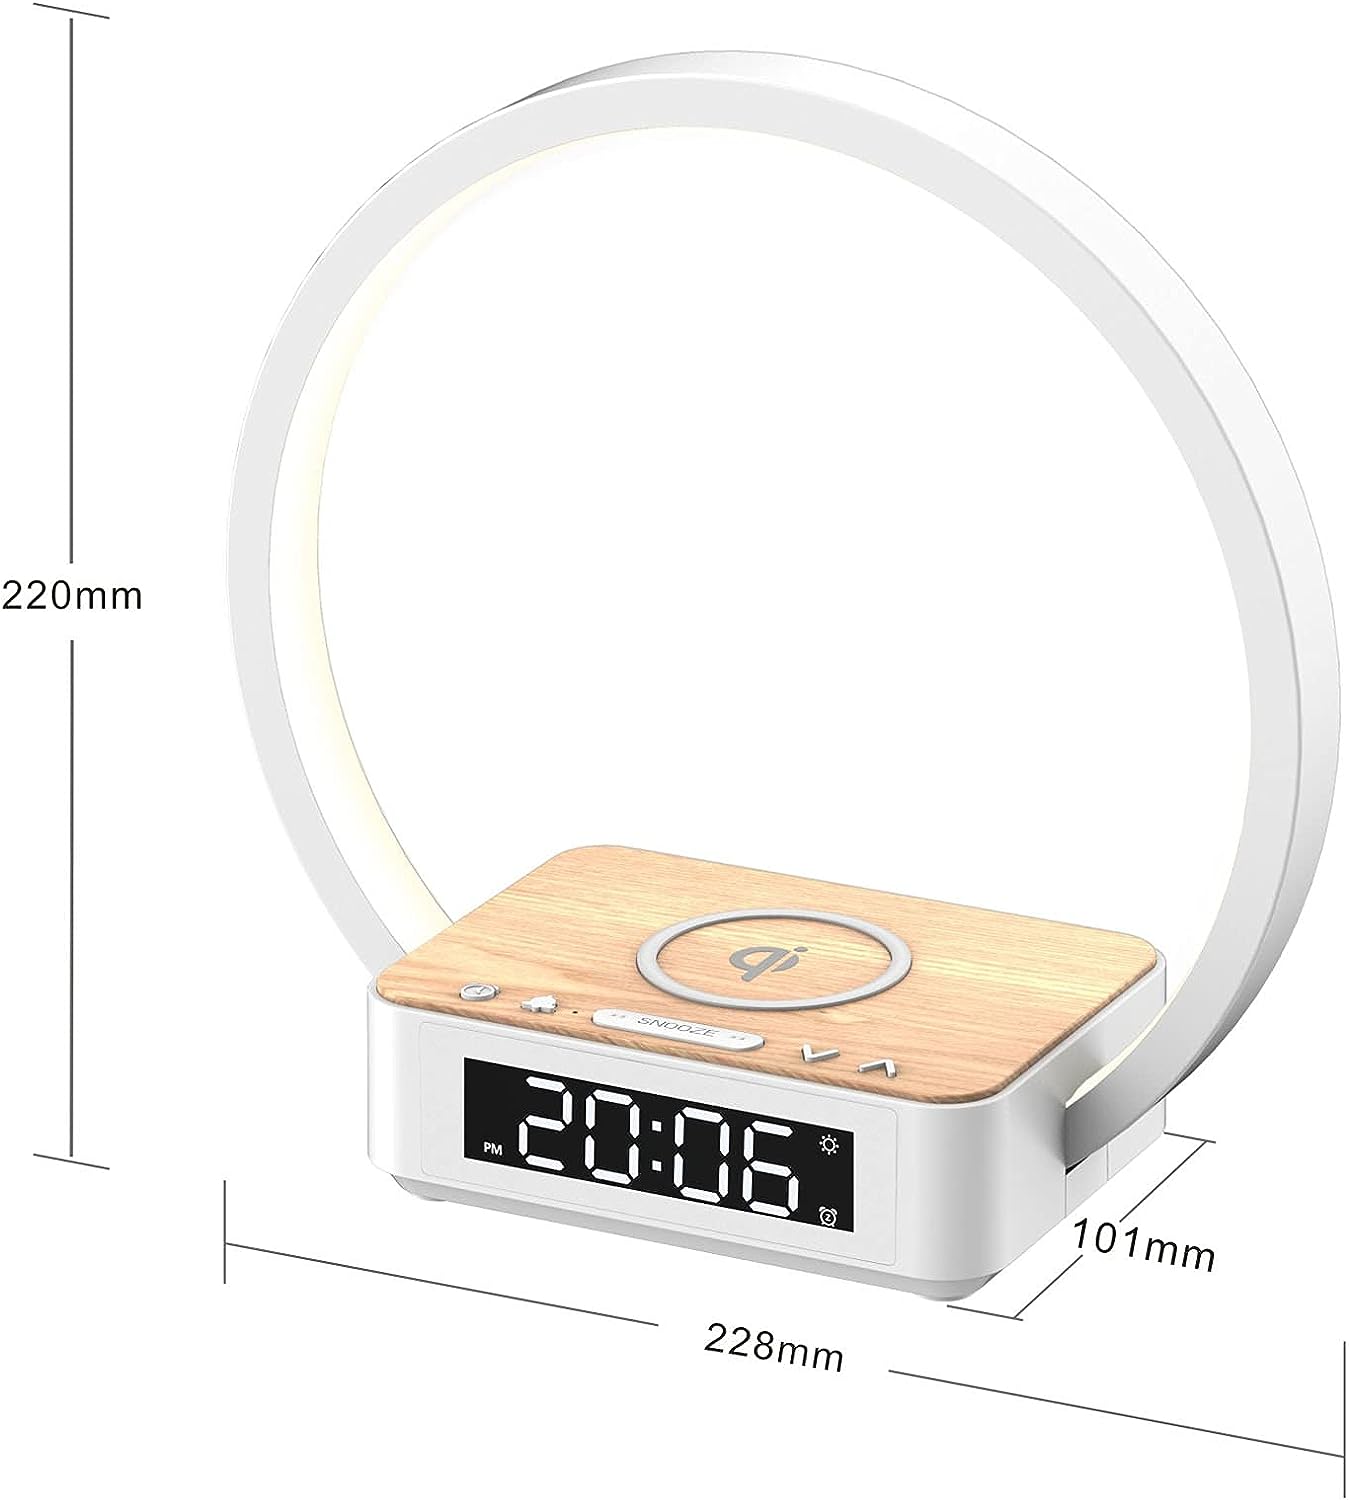 Bedside Lamp Qi Wireless Charger LED Desk Lamp with Alarm Clock, Touch Control 3 Light Hues, 10W Max Wireless Charging Table Lamp，Eye-Caring Reading Light for Kids, Adults, Home.